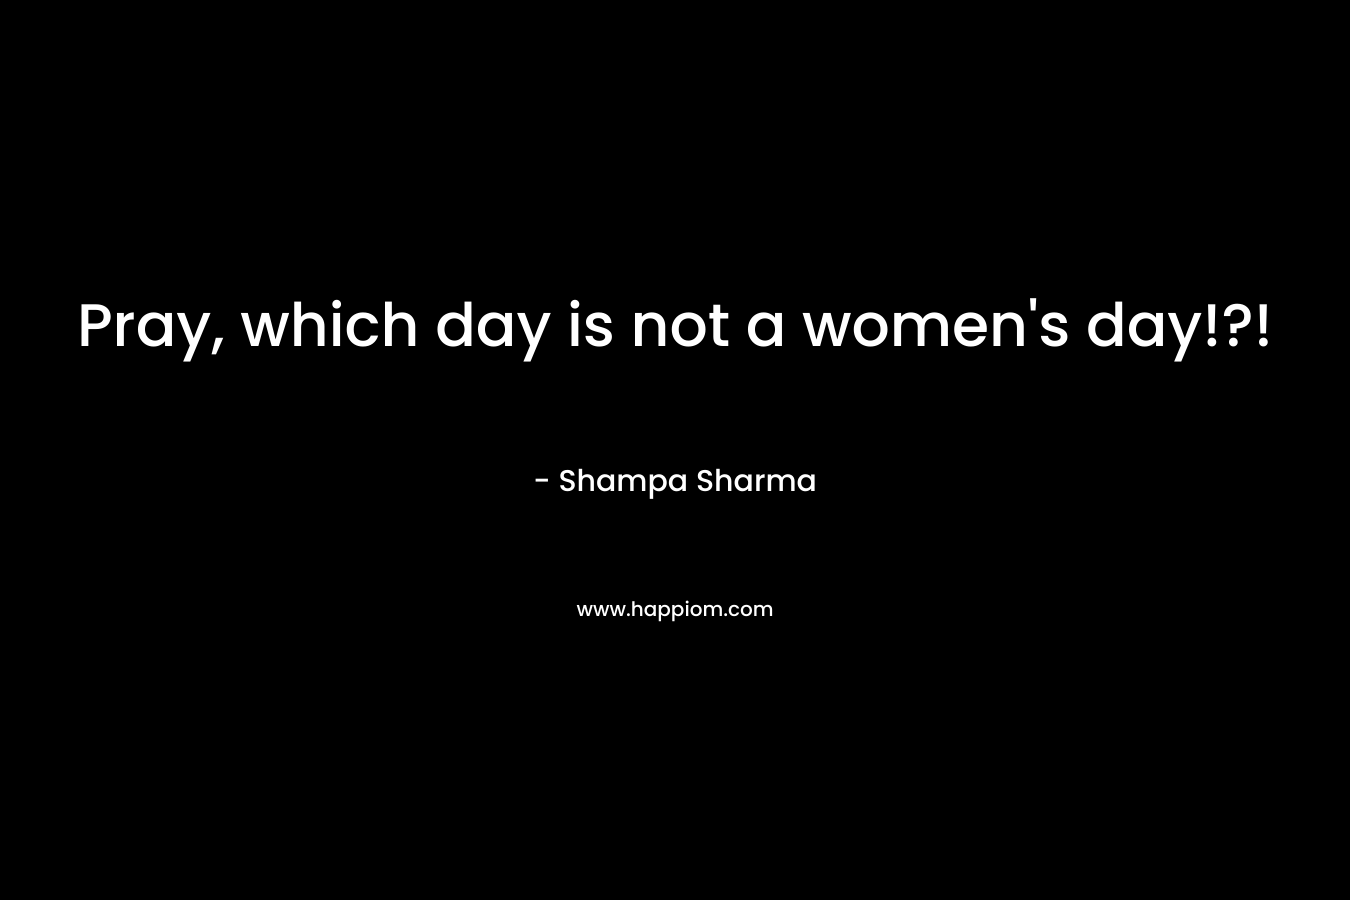 Pray, which day is not a women’s day!?! – Shampa Sharma